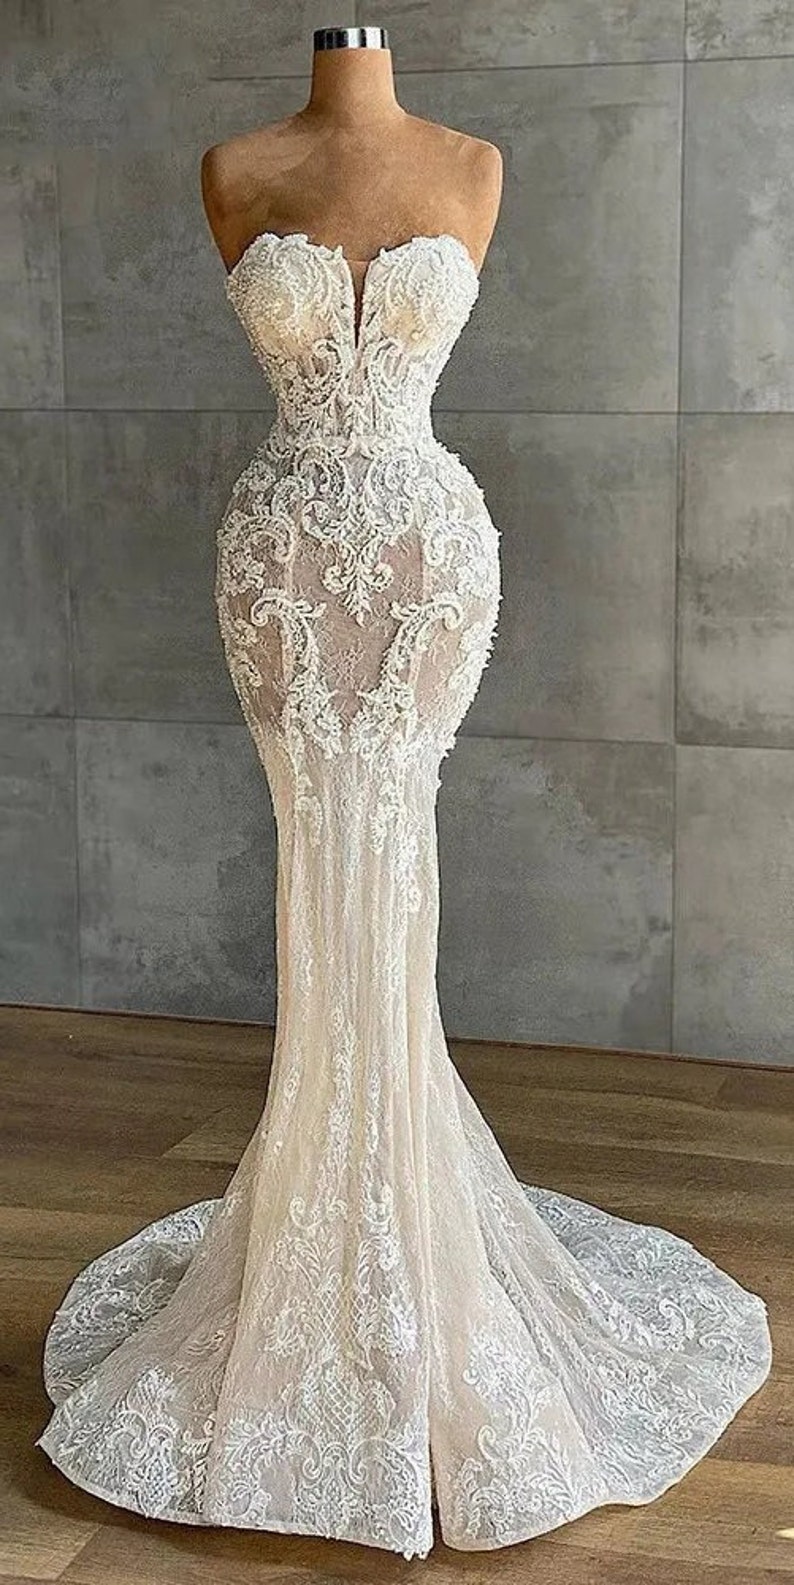 Luxury Crystal Beaded Mermaid Lace Wedding Dress Sweetheart Strapless Sleeveless Appliques Bridal Gown Bridal Dress Bride Gown zdjęcie 2